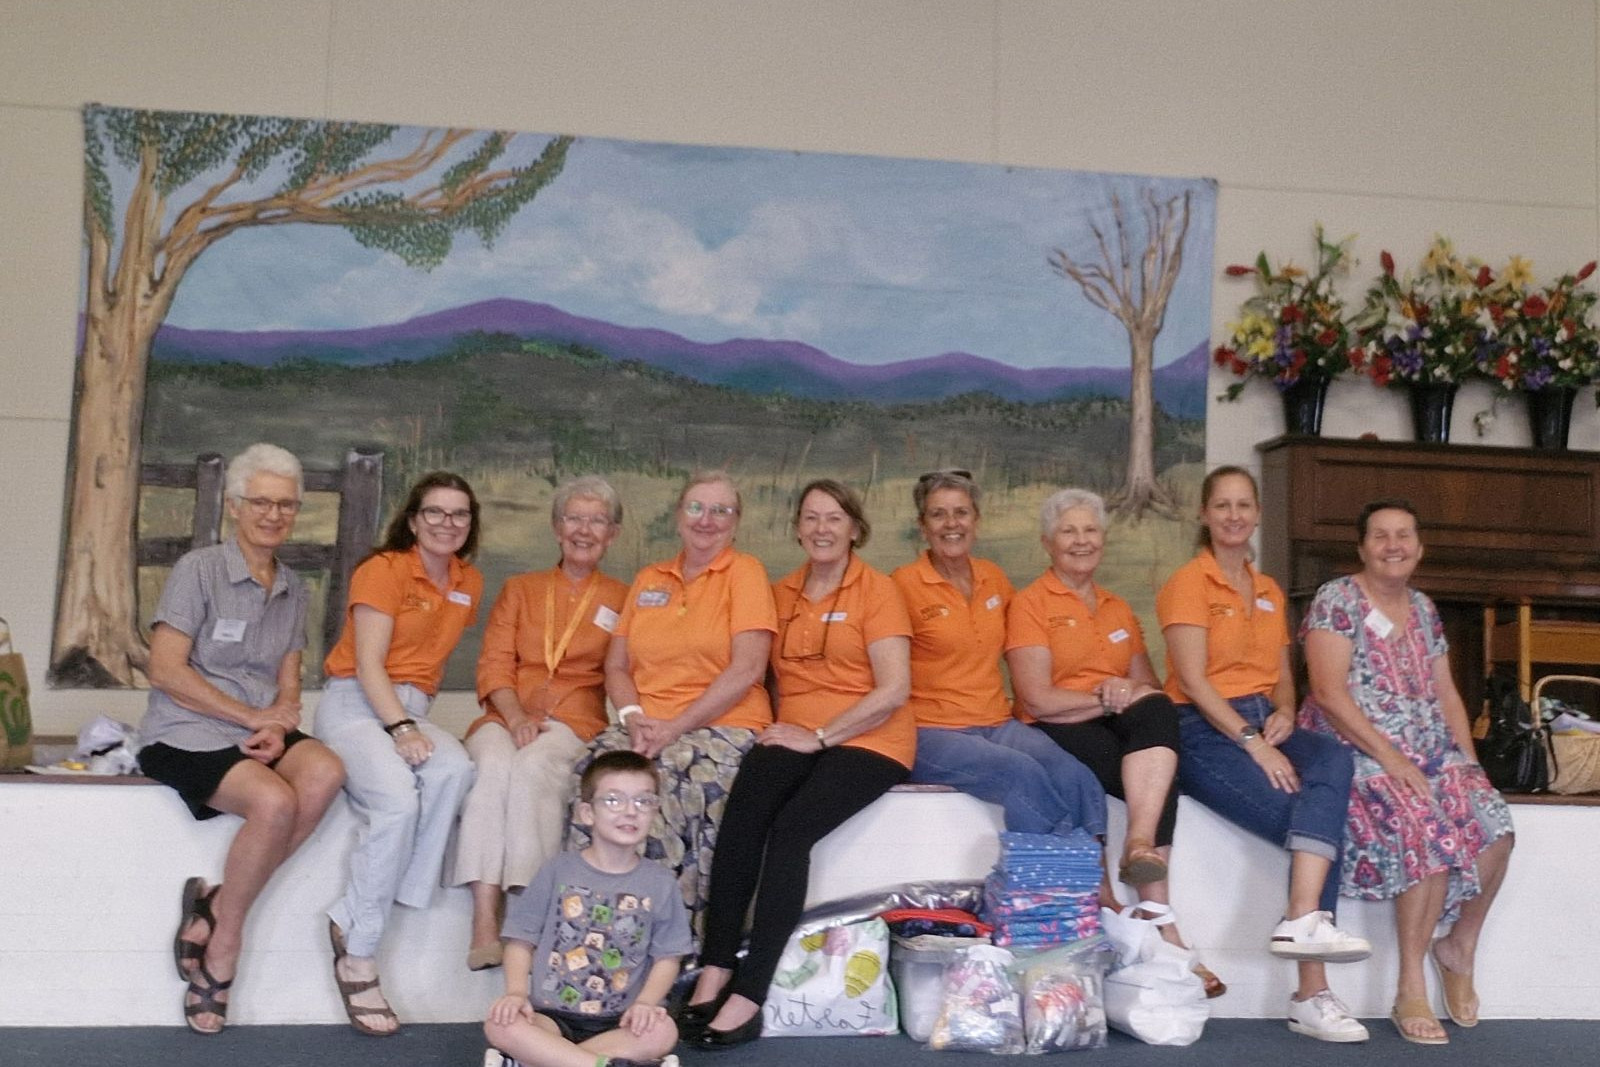 Kilcoy sewing group Days for Girls receives accreditation - feature photo